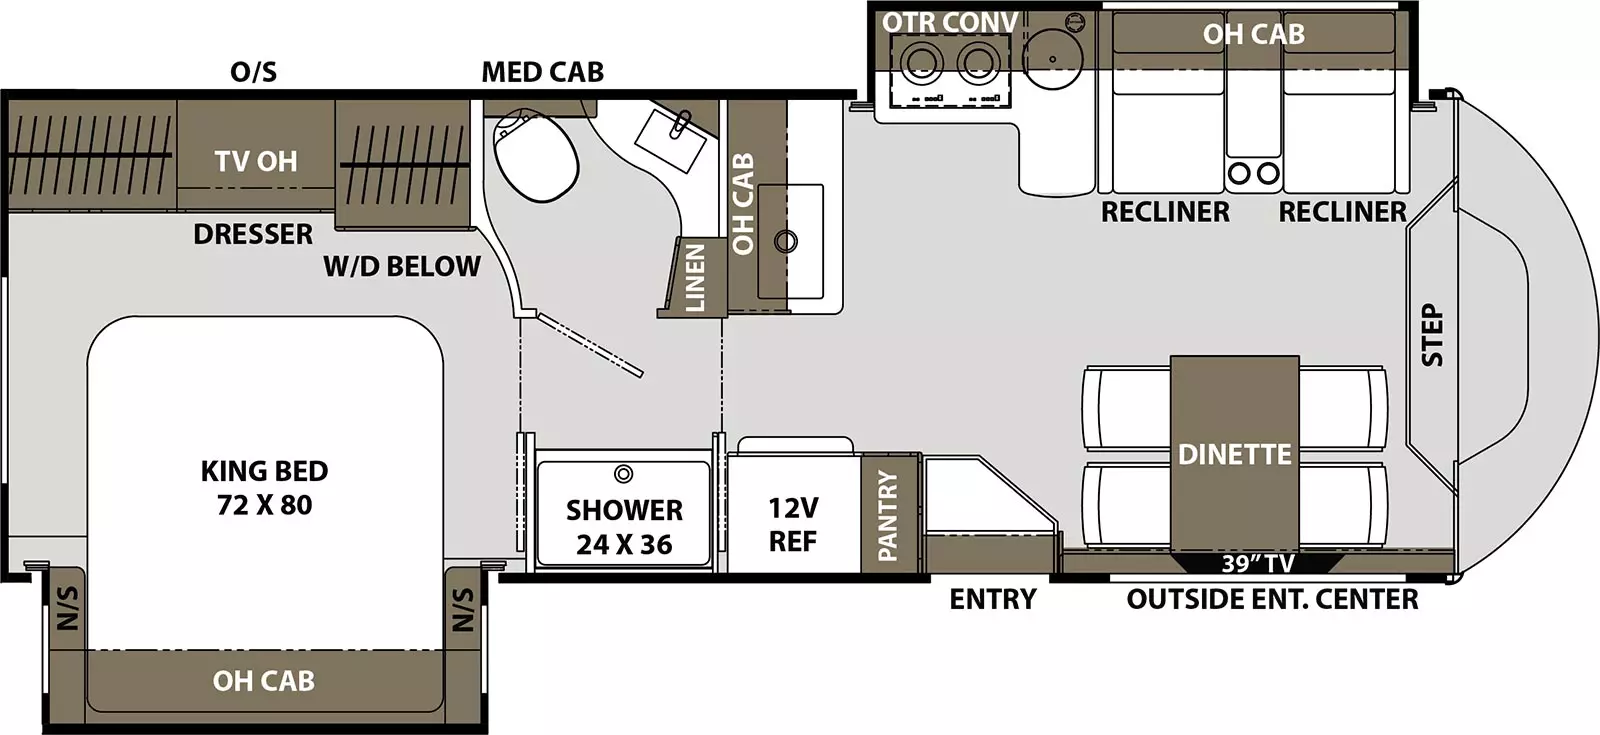 The 321DS has 2 slide outs and 1 entry door. Exterior features include an outside shower and outside entertainment center. Interior layout from front to back: off-door slide out with over the range convection microwave, stove top, sink, 2 recliners and overhead cabinet; door side dinette with 39" TV; pantry and 12V refrigerator near entry door; front facing sink with overhead cabinet; walk through bathroom with 24 x 36 inch shower on the door side and toilet, medicine cabinet, linen storage and vanity on the off-door side; rear bedroom with 72 x 80 King bed in a door side slide out; nightstands on each side of the bed; dresser with TV overhead and washer/dryer.